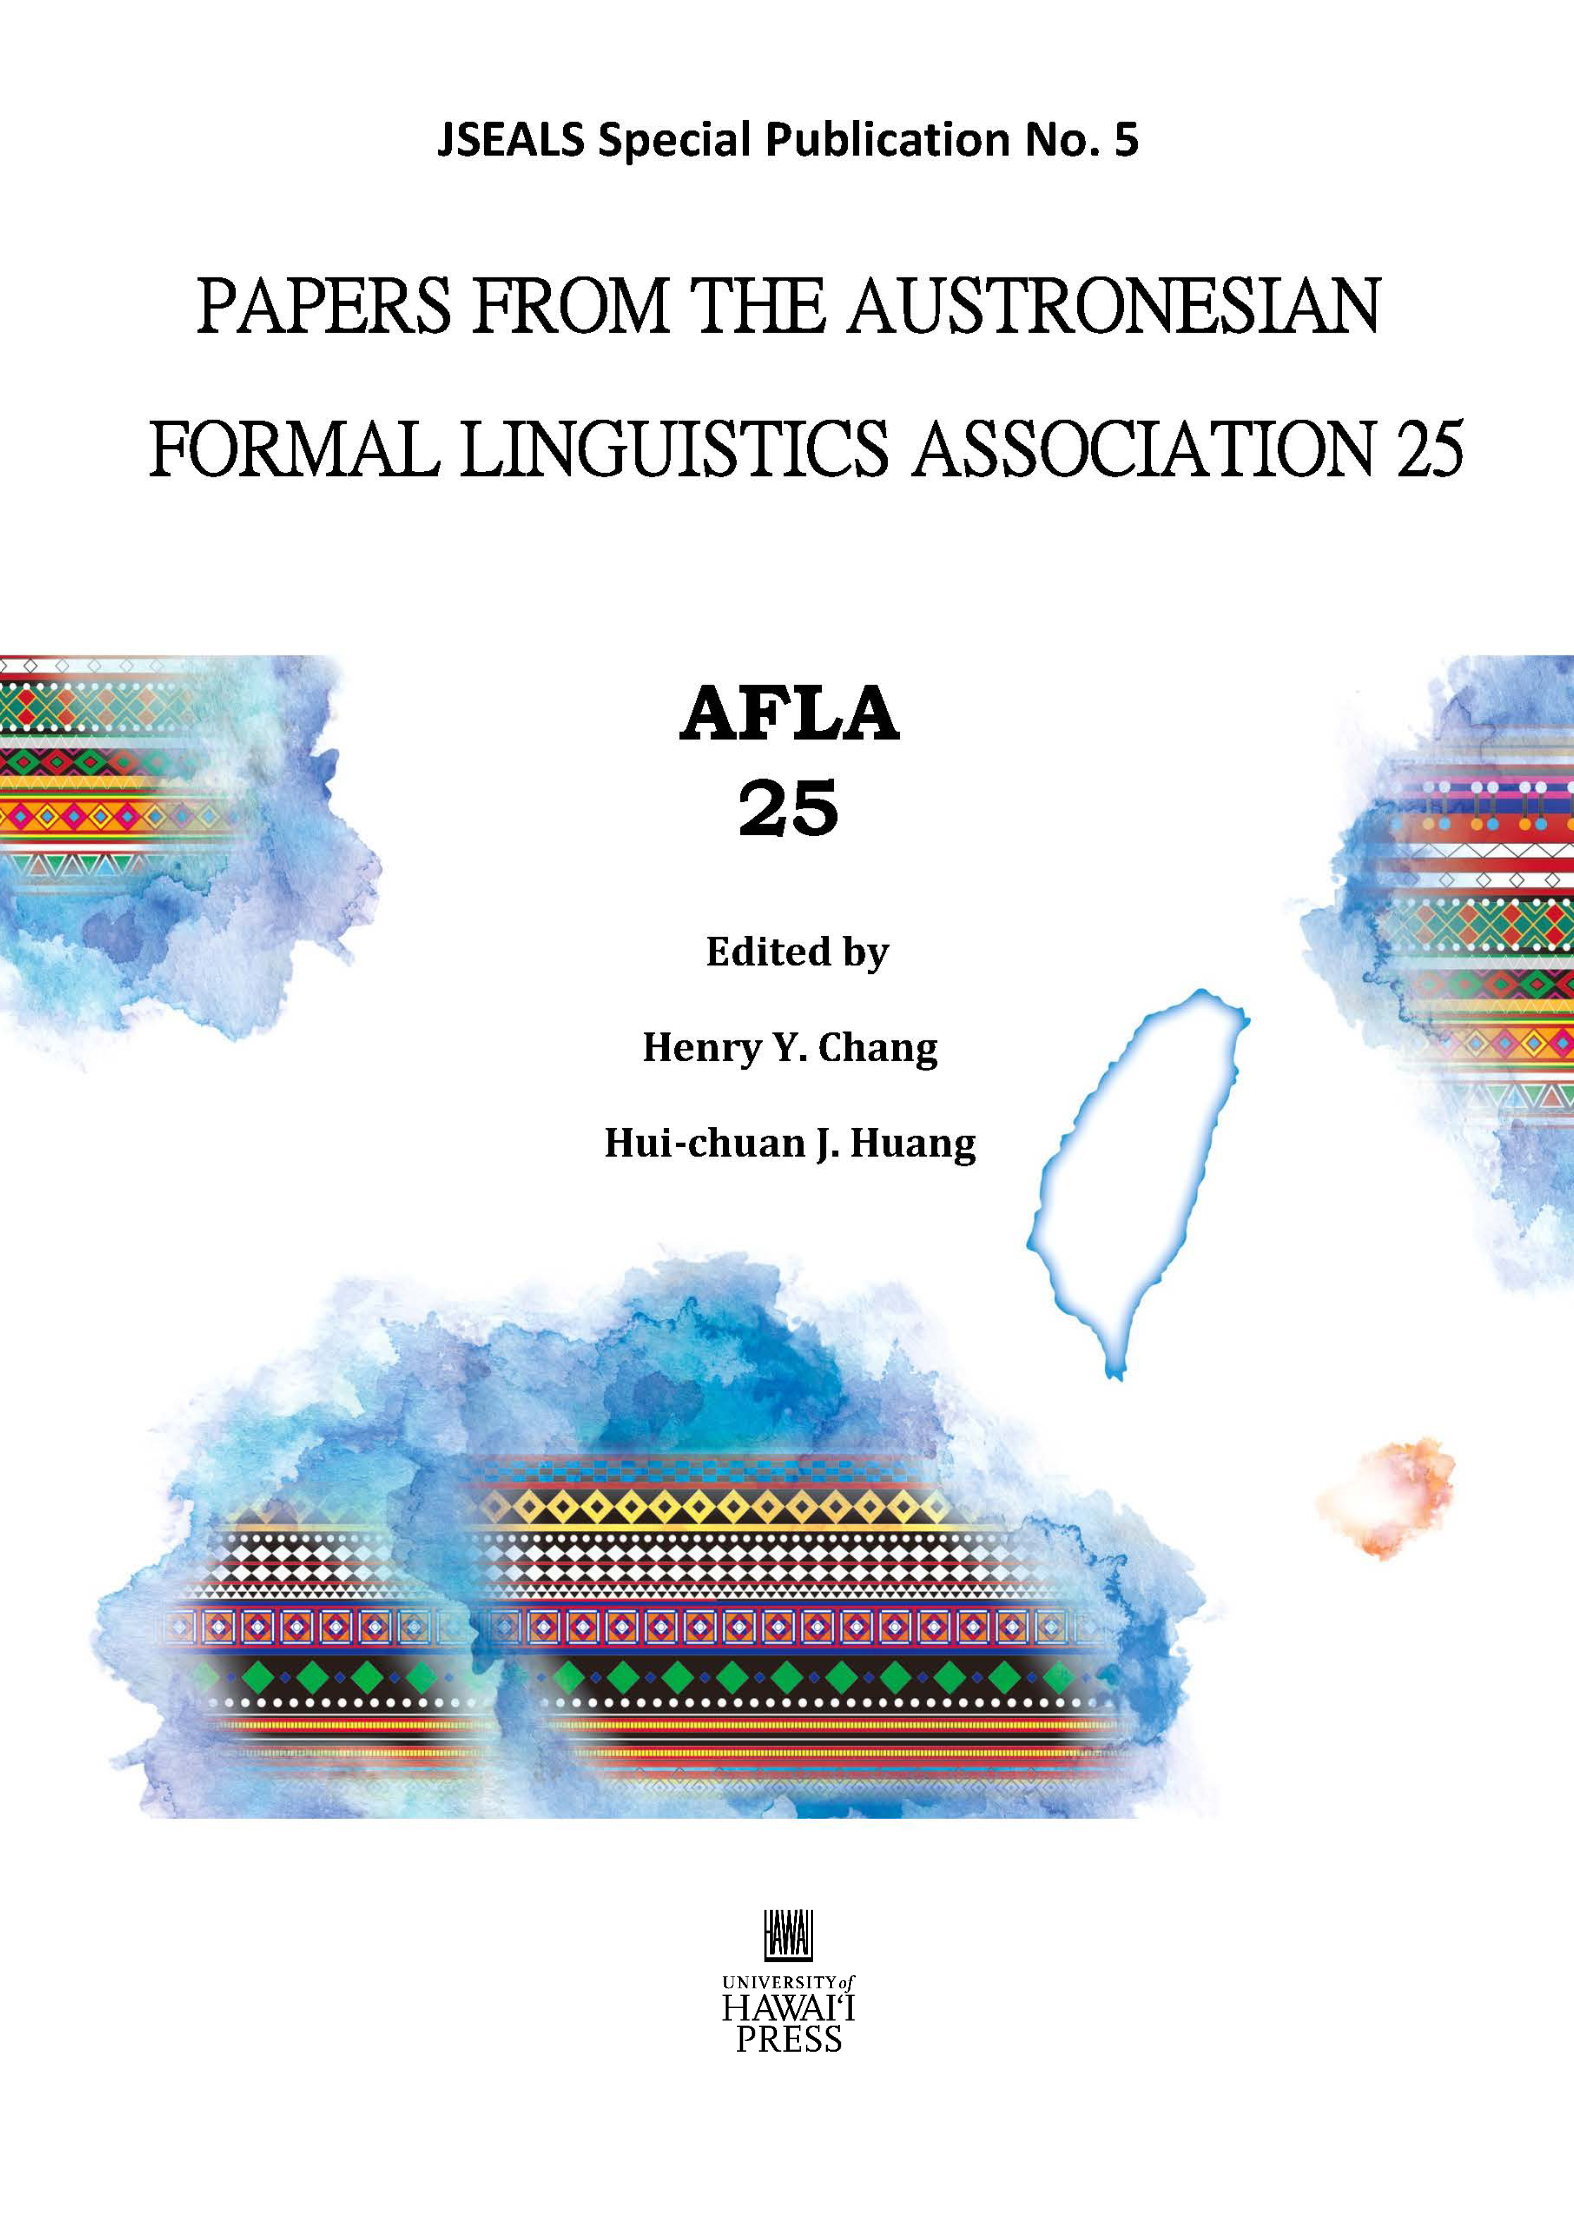 Journal of the Southeast Asian Linguistics Society – Papers from the Austronesian Formal Linguistics Association 25